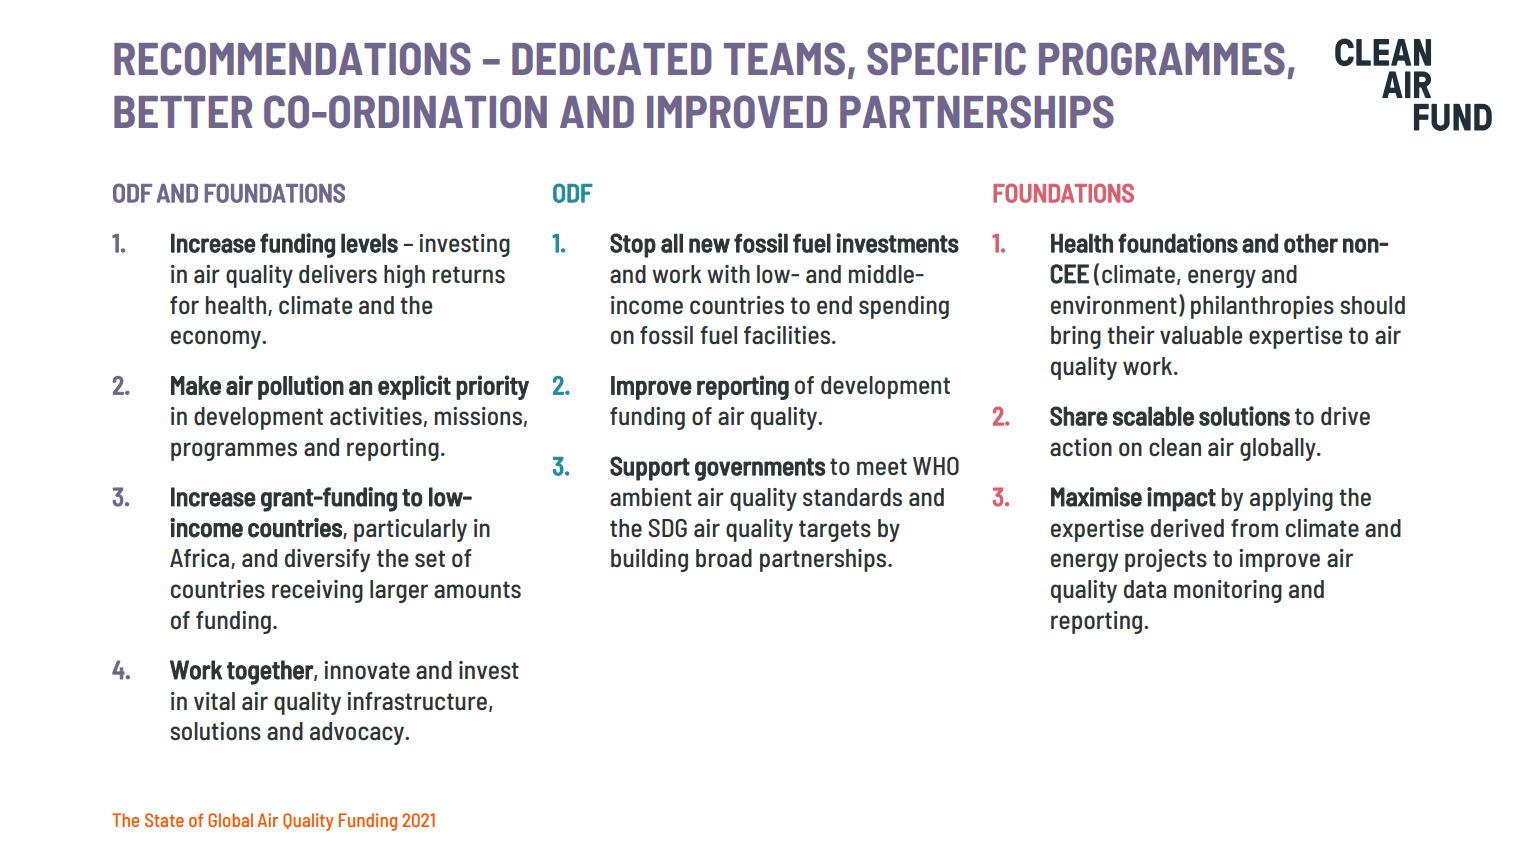 recommendations - dedicated teams, specific programmes, better co-ordination and improved partnerships.